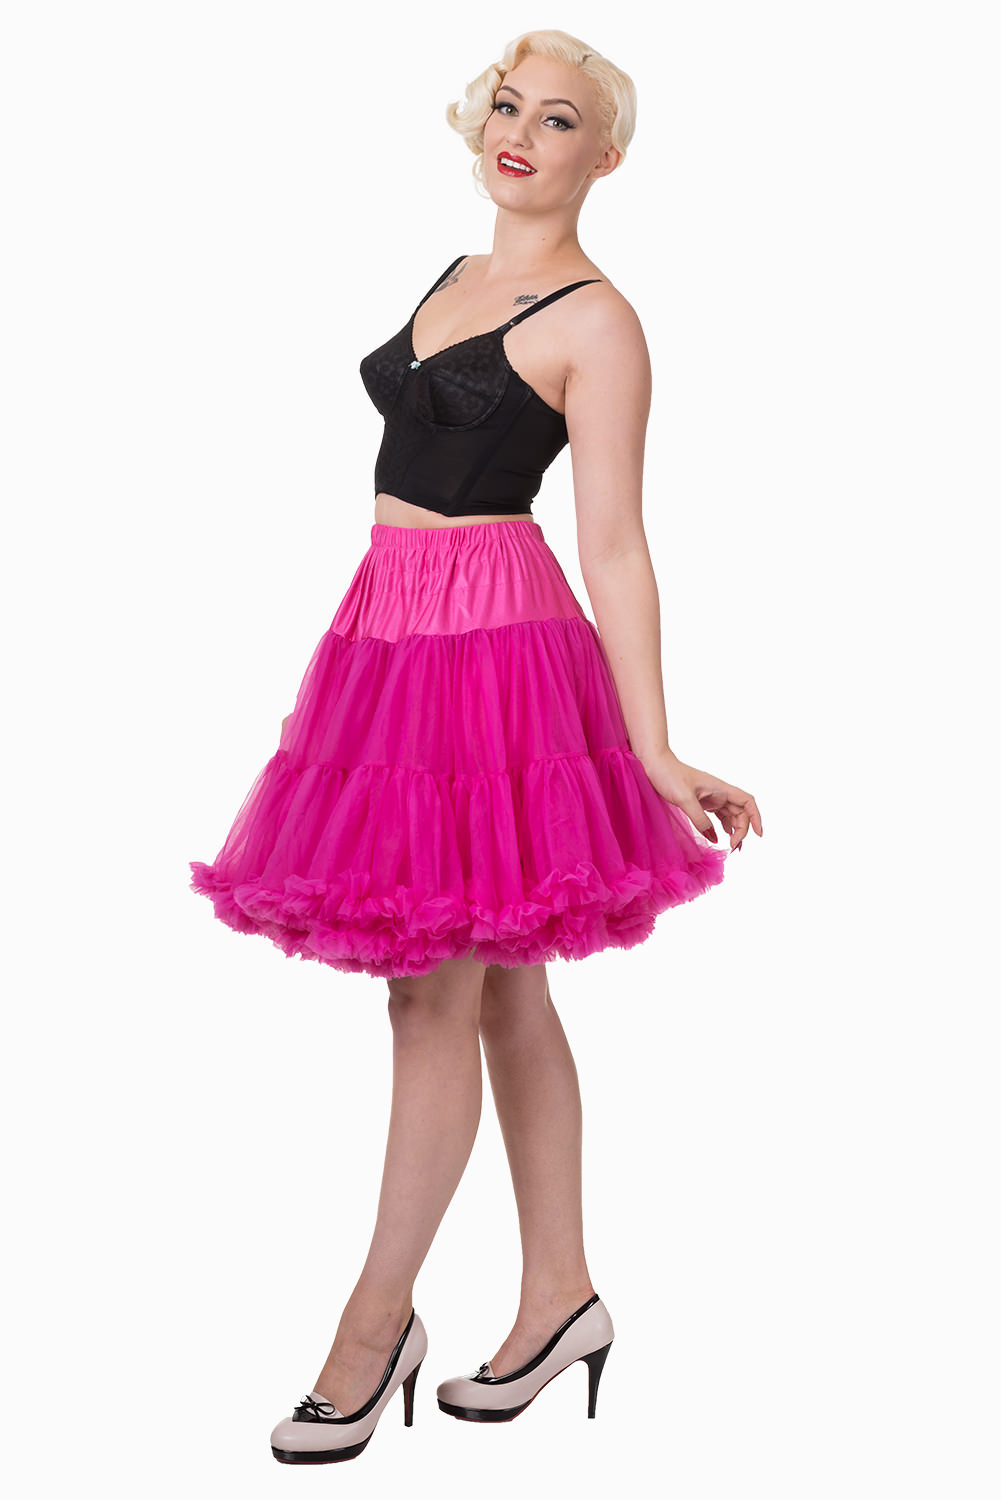 Banned Retro 50s Walkabout Hot Pink Petticoat